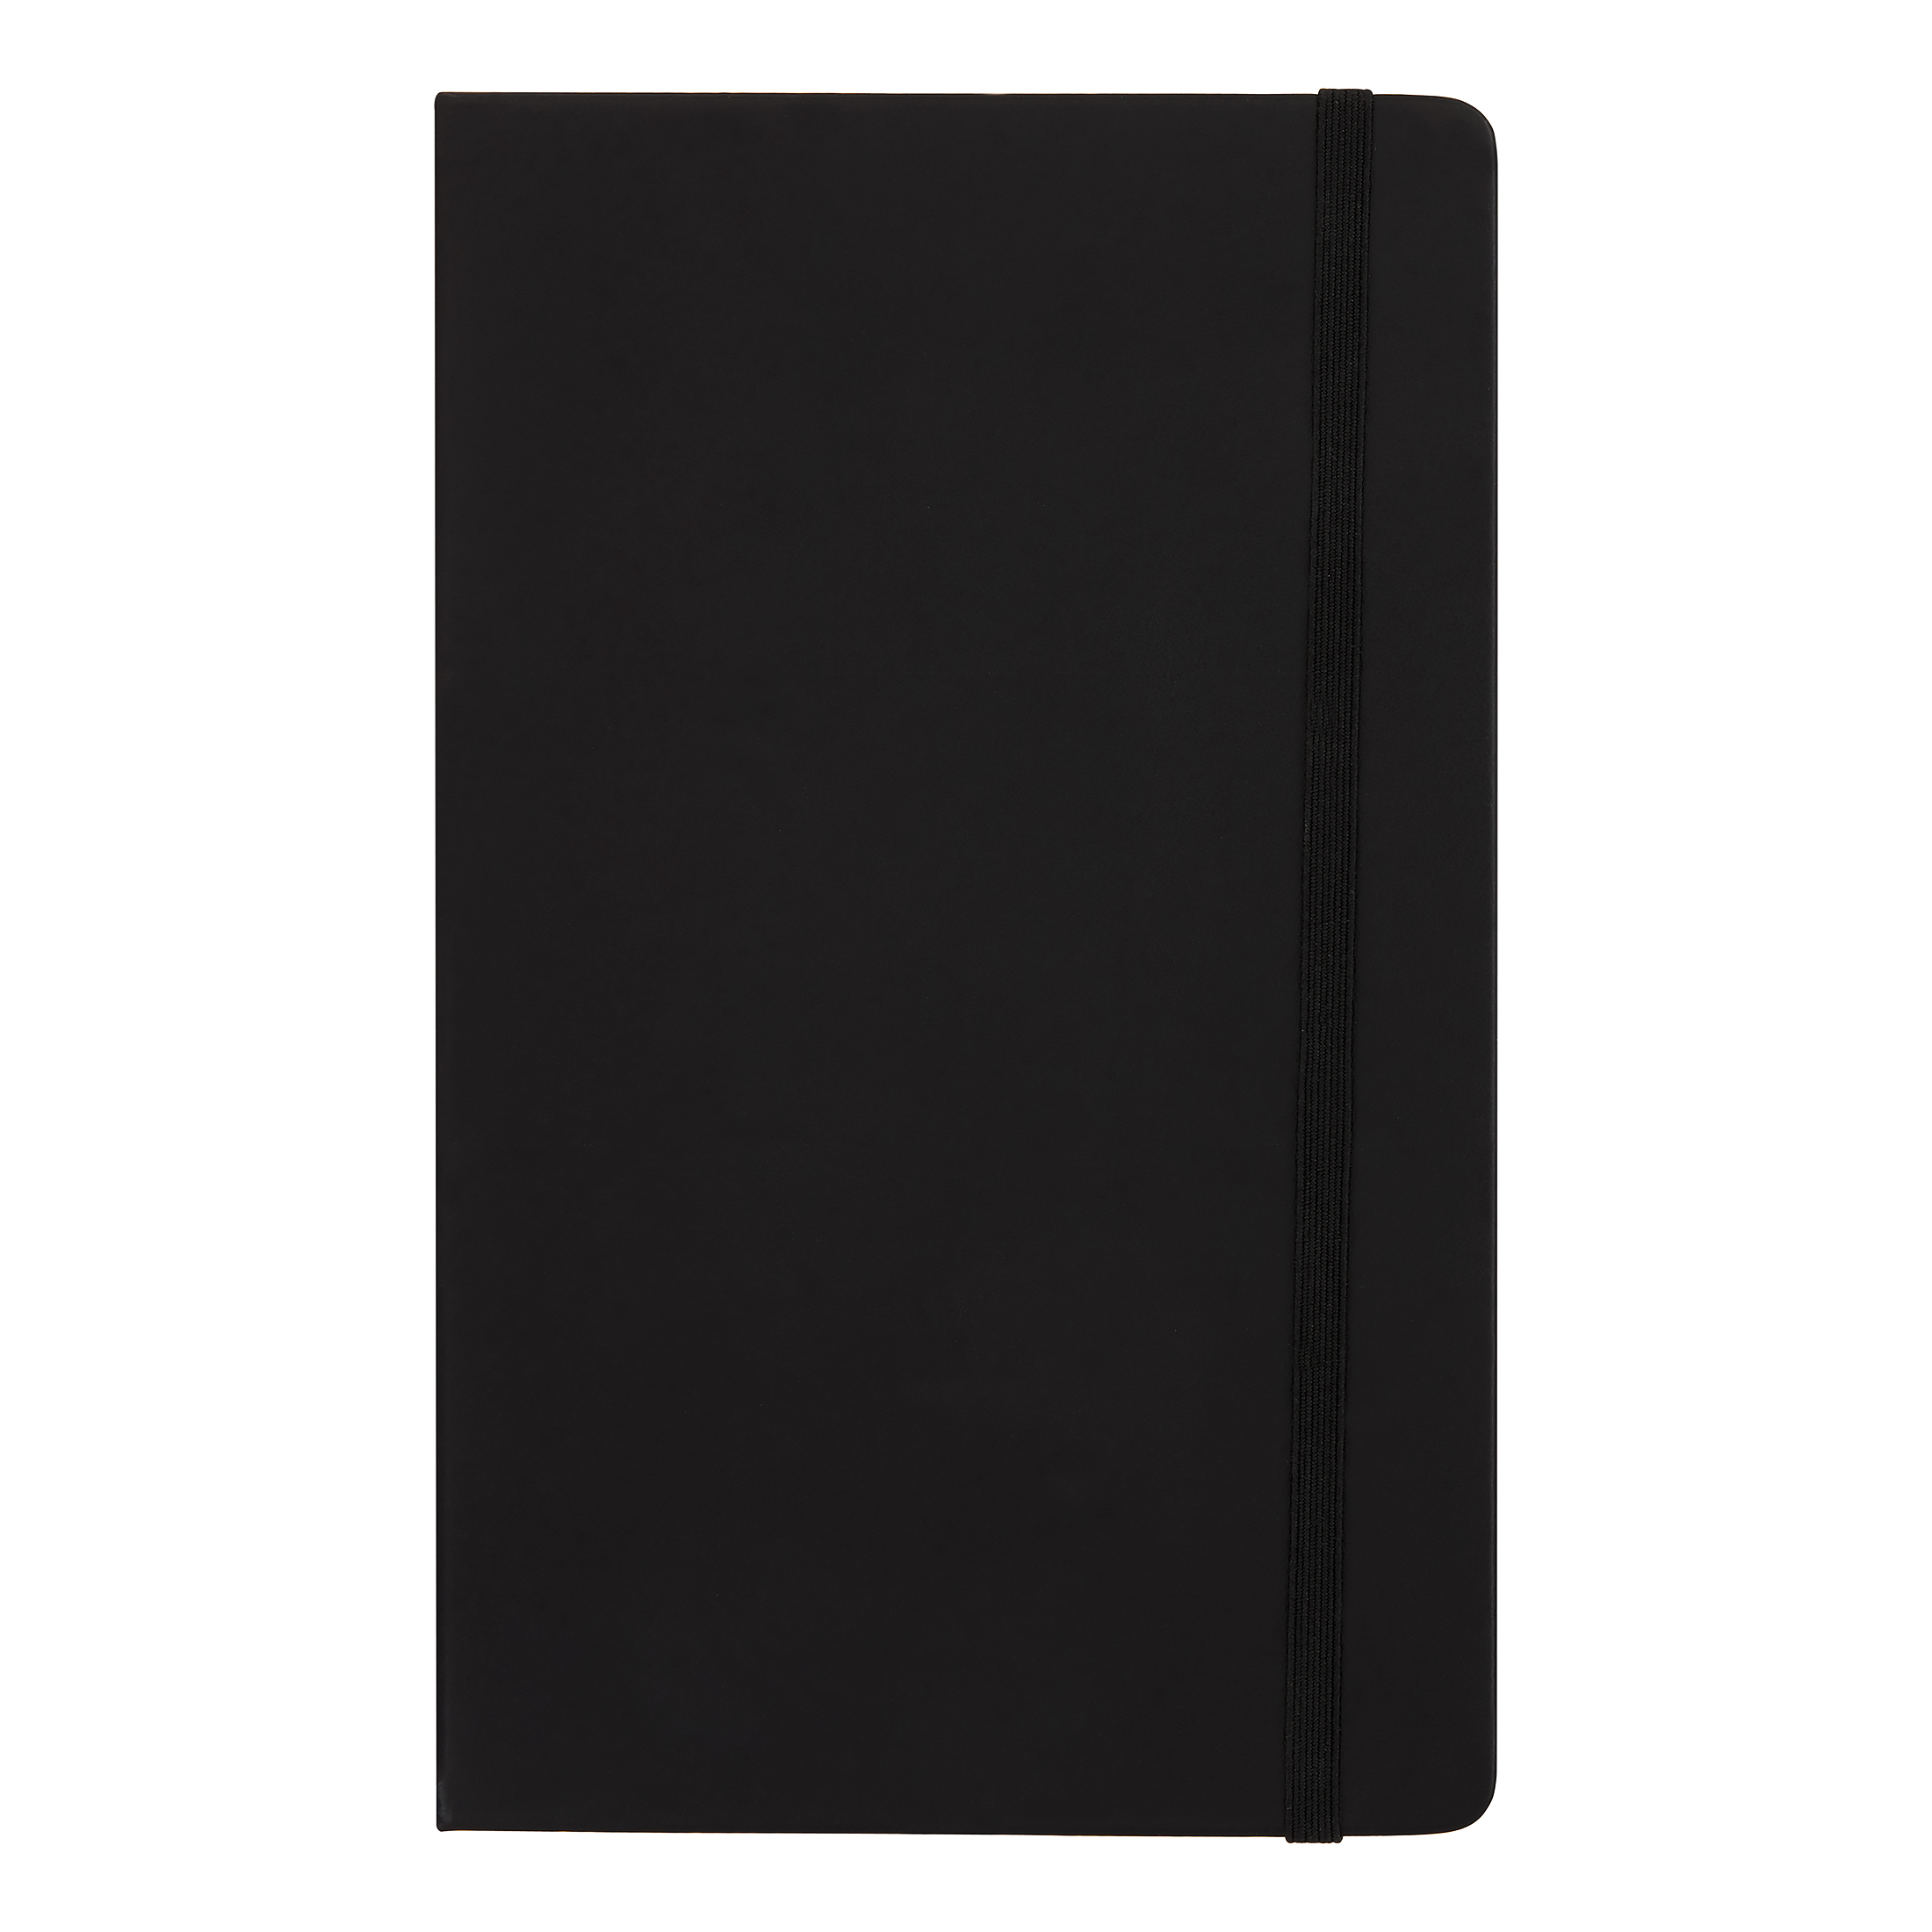 Exceed Medium Journal, Dot Grid, 120 Pages, 5" x 8.25", Black, 86520 - image 2 of 9